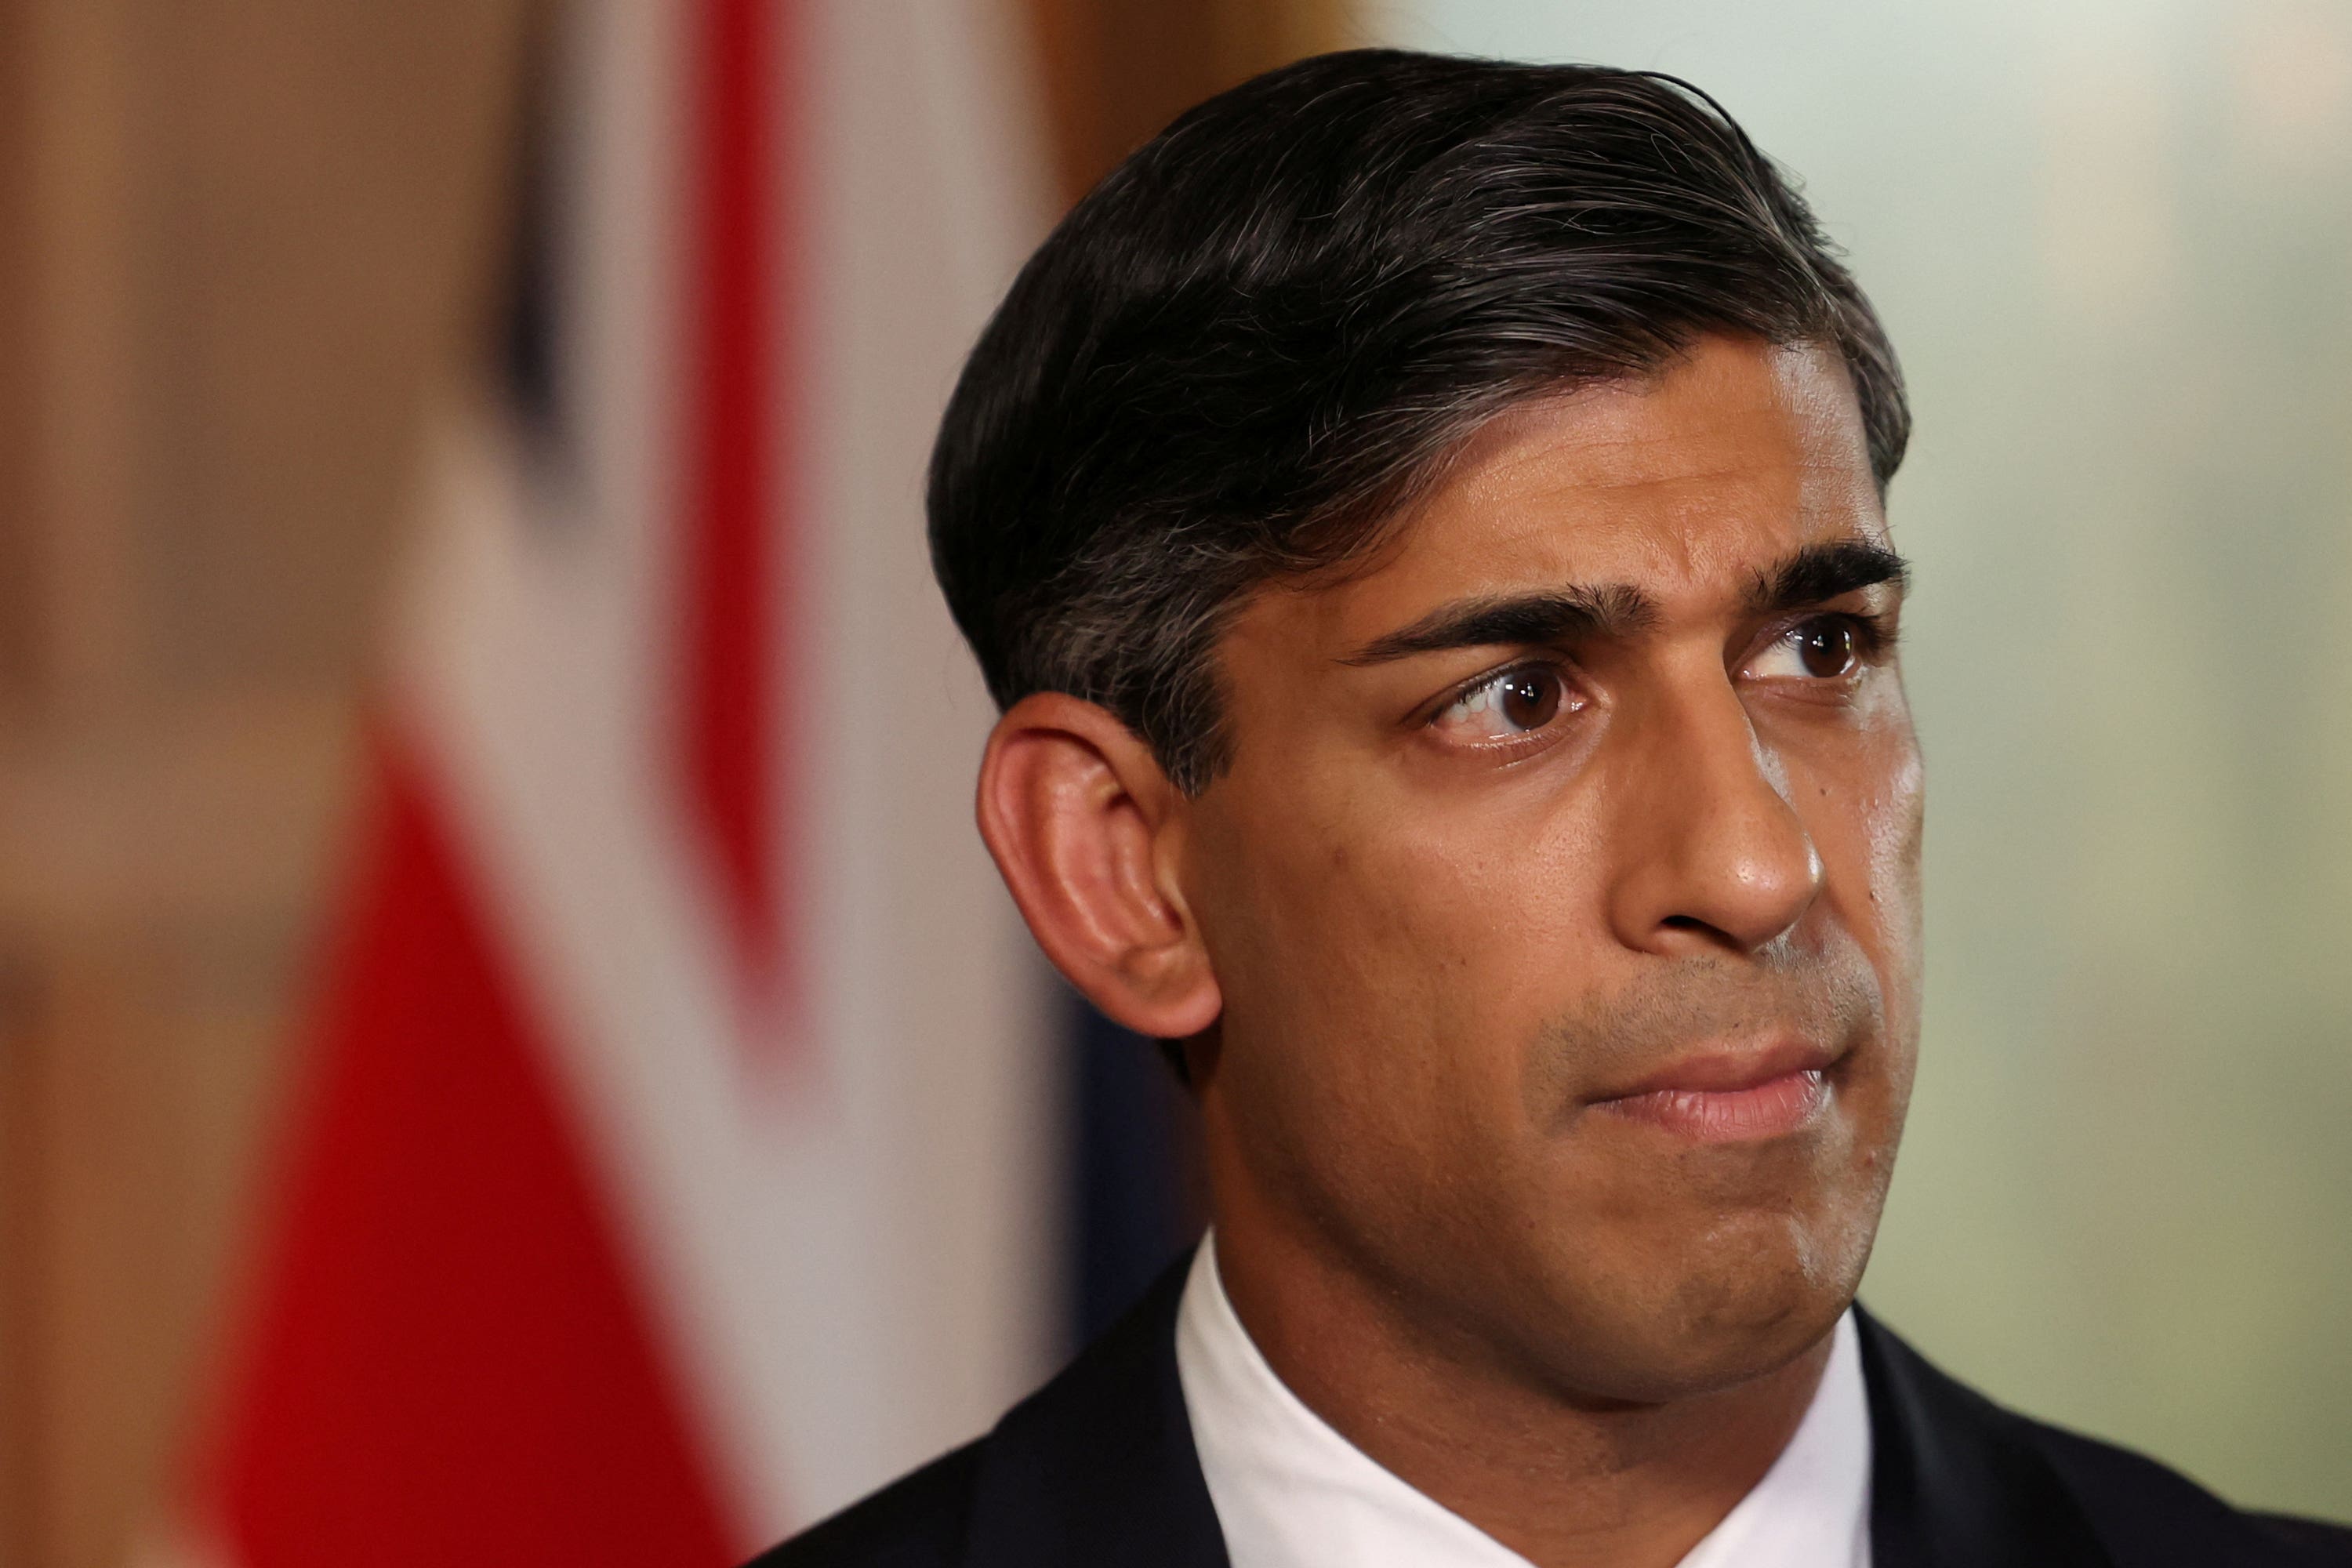 Rishi Sunak must take responsibility for what has befallen his party – though much was the fault of his predecessors